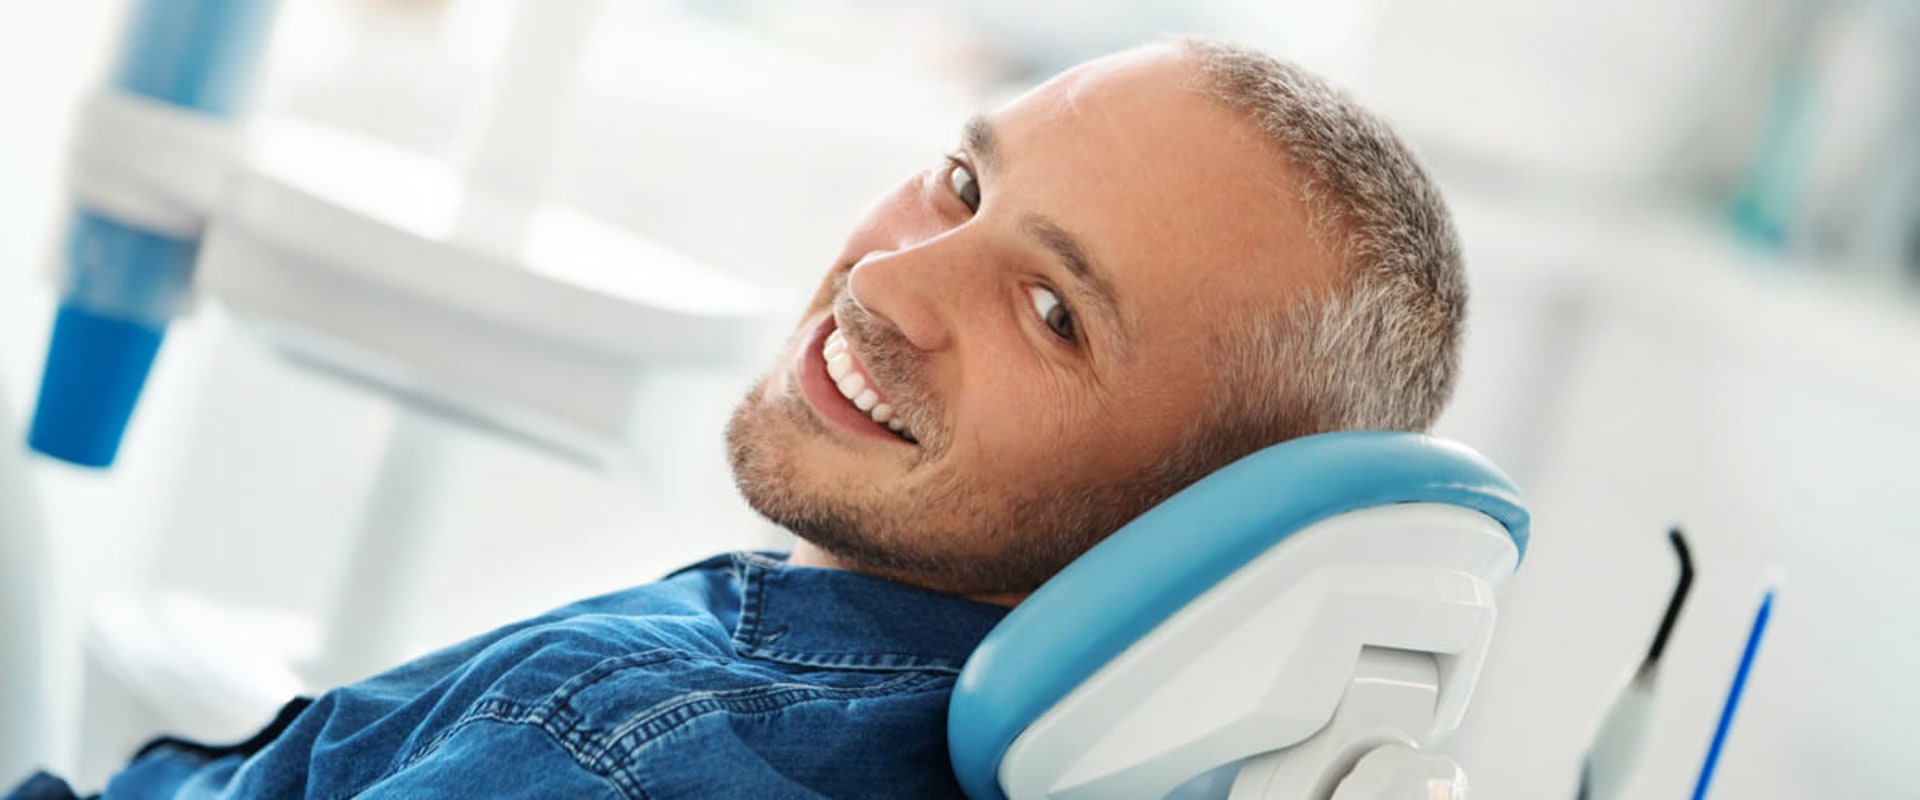 Transform Your Smile With Dental Implants In Dripping Springs